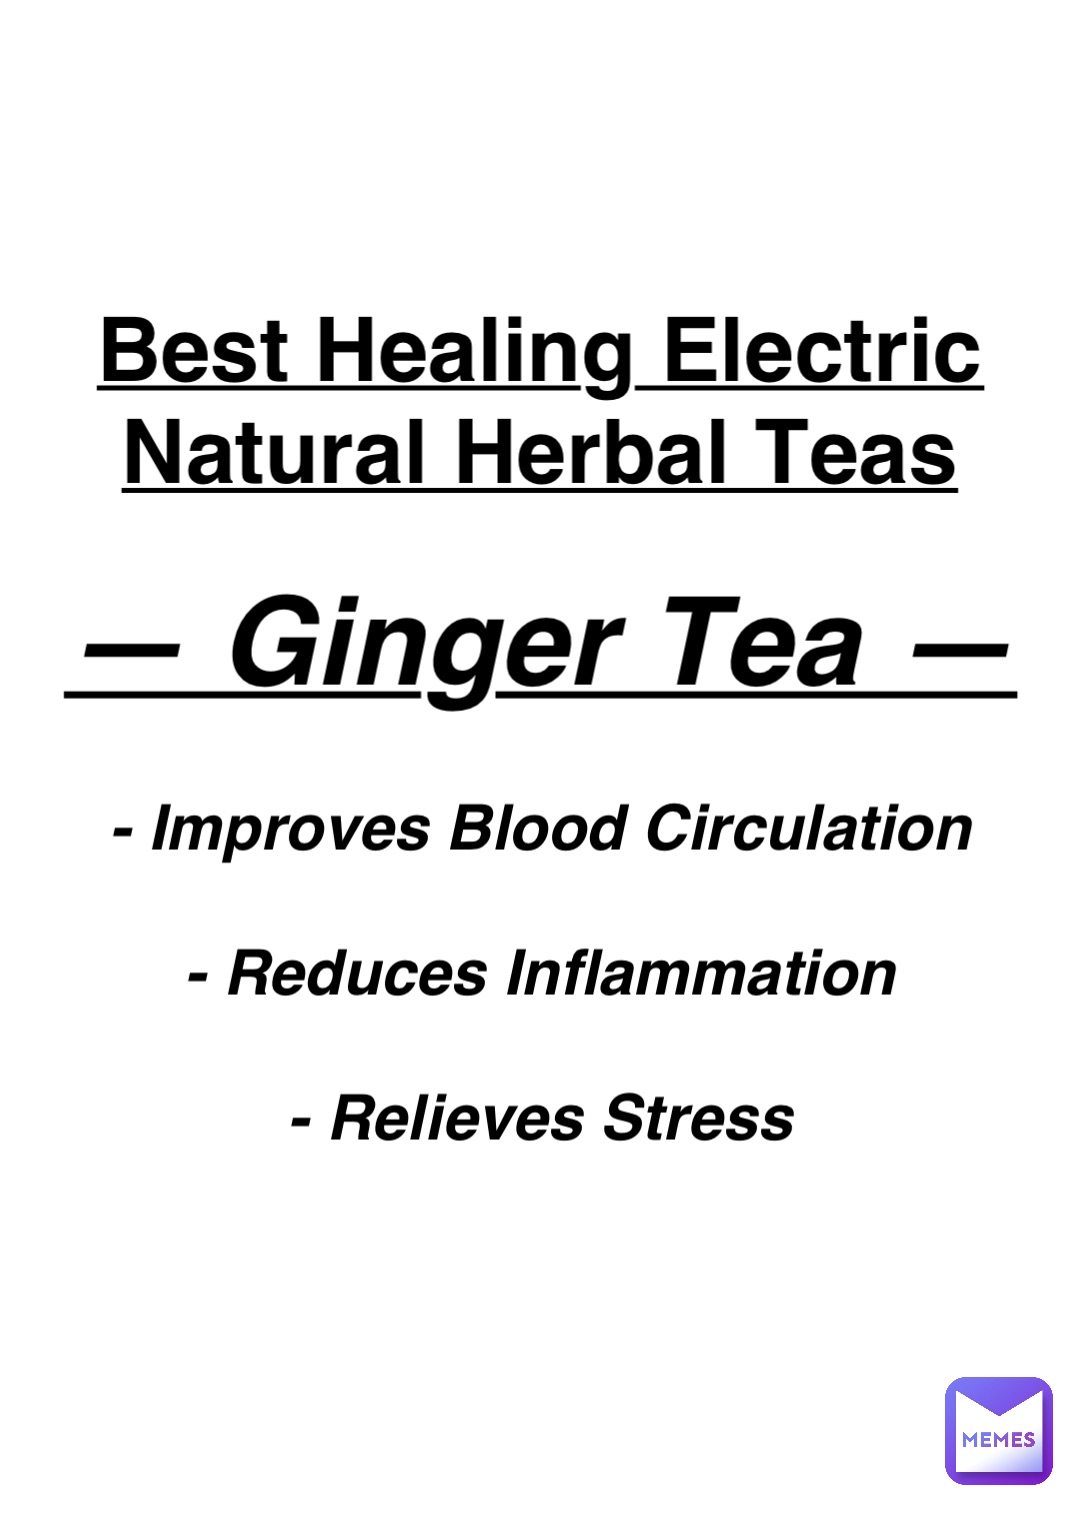 Double tap to edit Best Healing Electric Natural Herbal Teas — Ginger ...